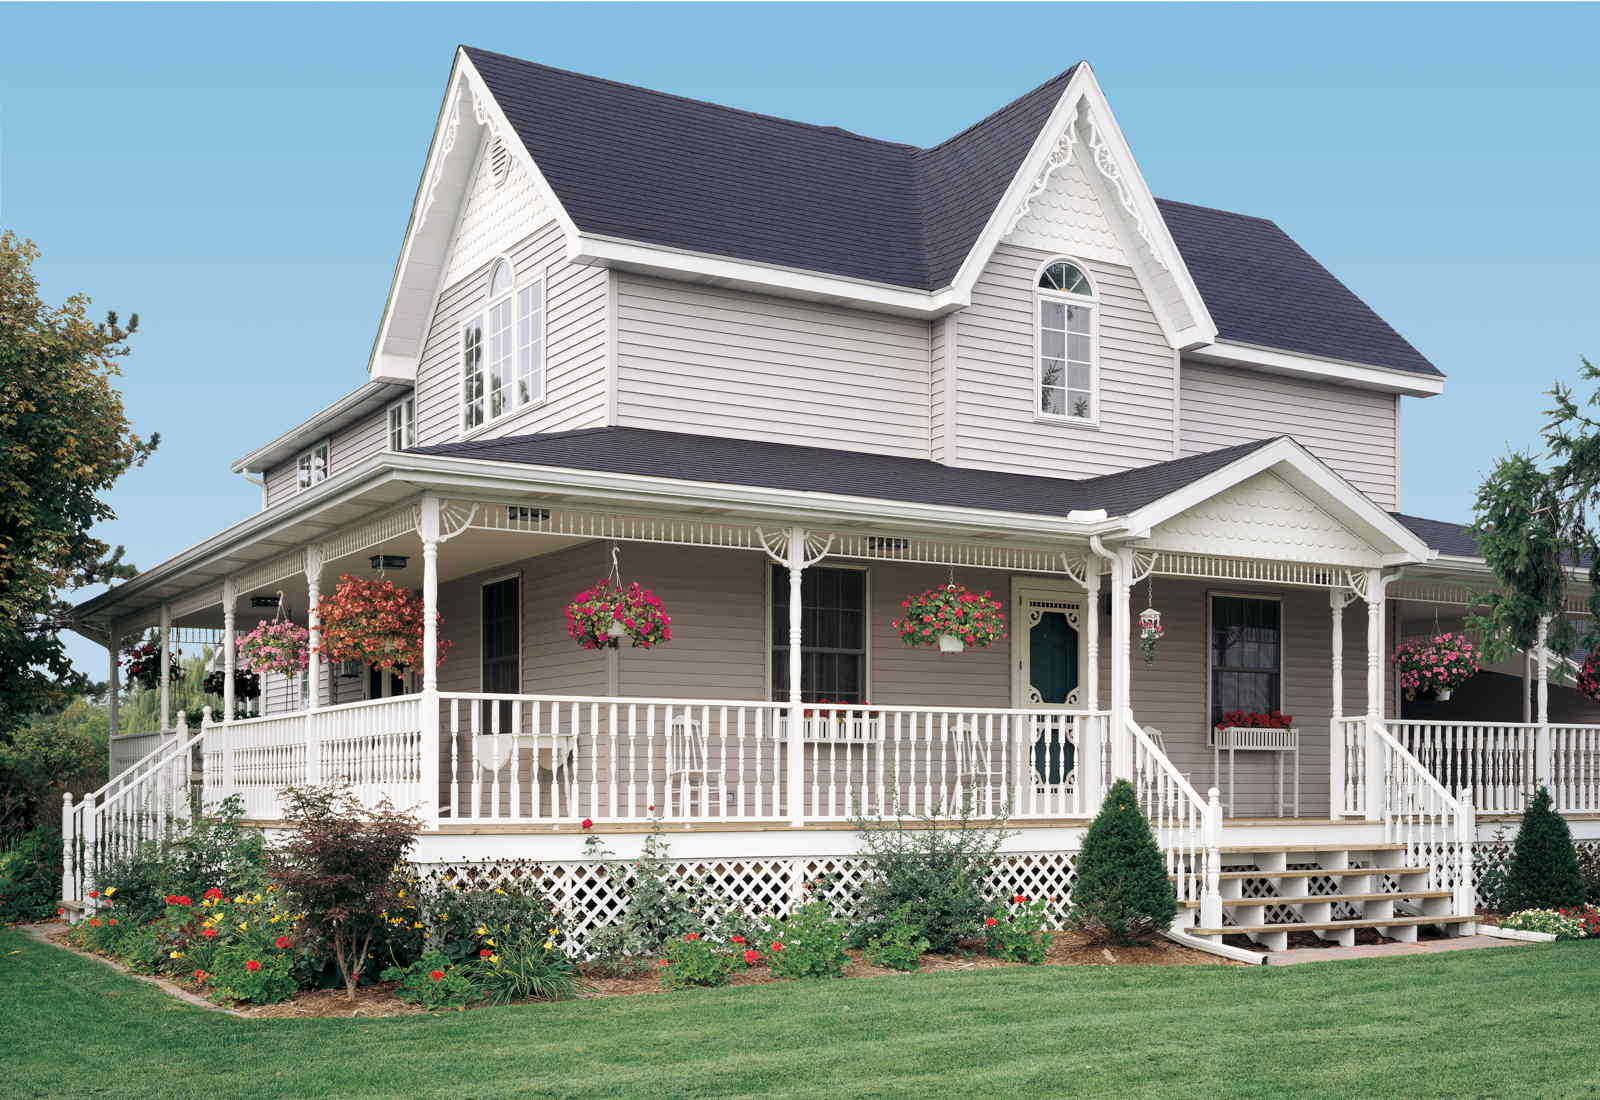 selecting a vinyl siding material with better energy ratings